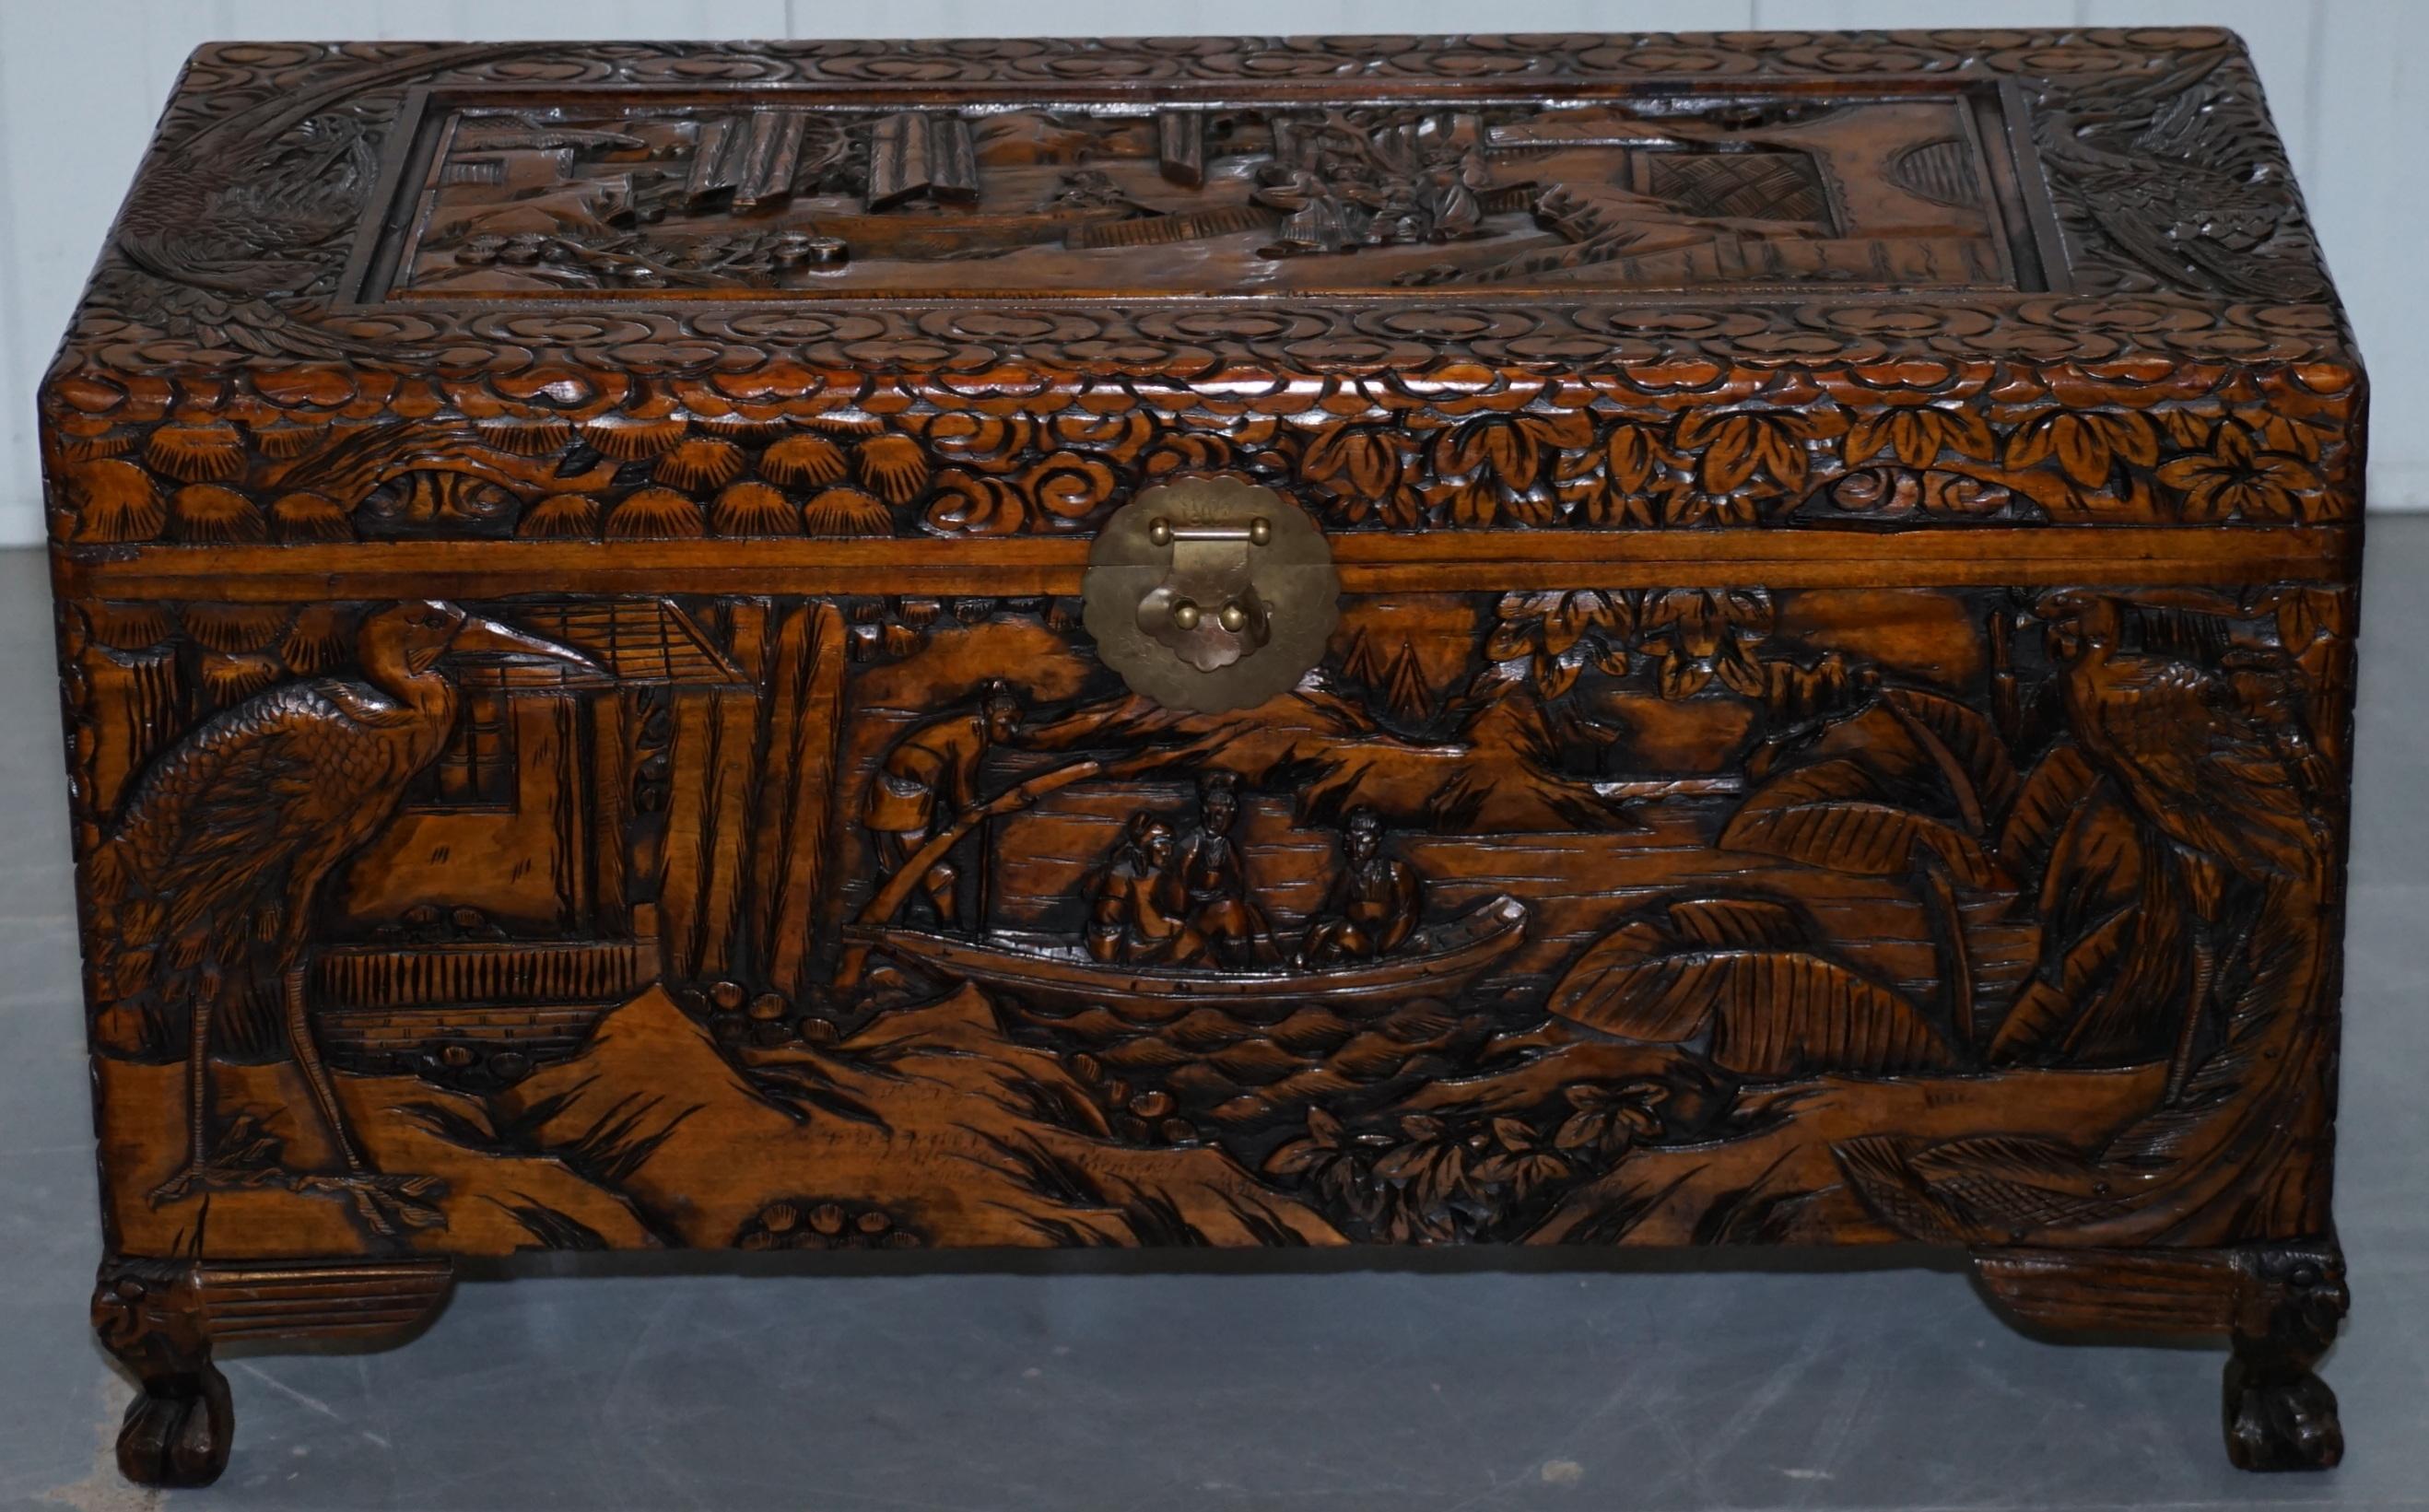 We are delighted to offer for sale this vintage Chinese or Japanese Export carved wood trunk with claw and ball feet

A good looking piece depicting rural scenes, the lock plate it hand hammered and engraved, the feet are claw and ball which I’ve